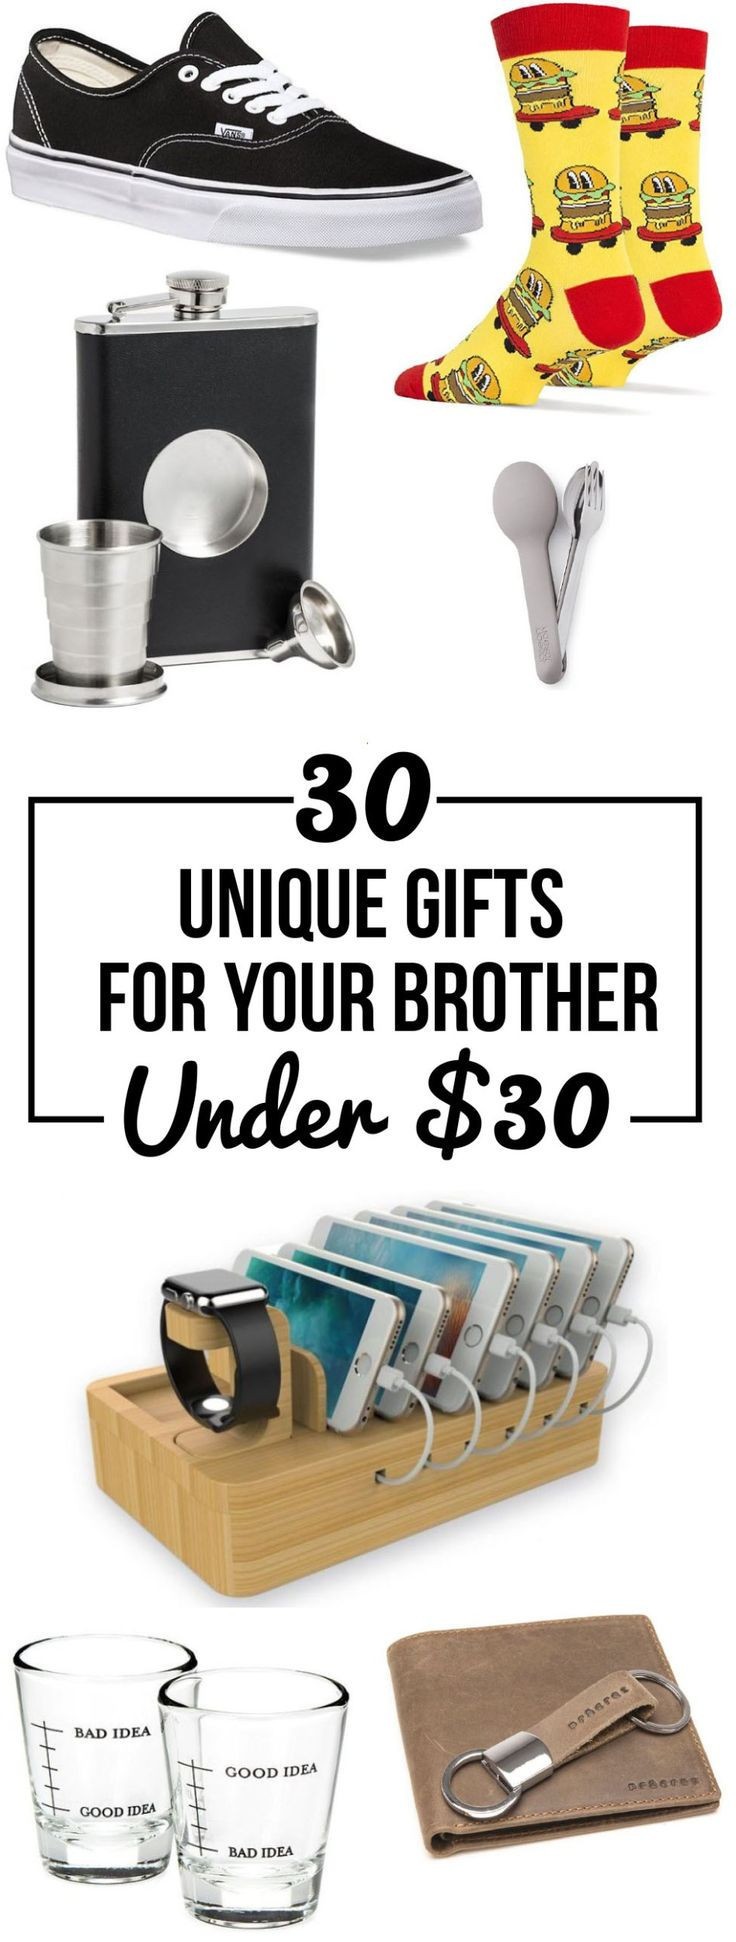 Graduation Gift Ideas For Brother
 The top 25 Ideas About Graduation Gift Ideas for Brother